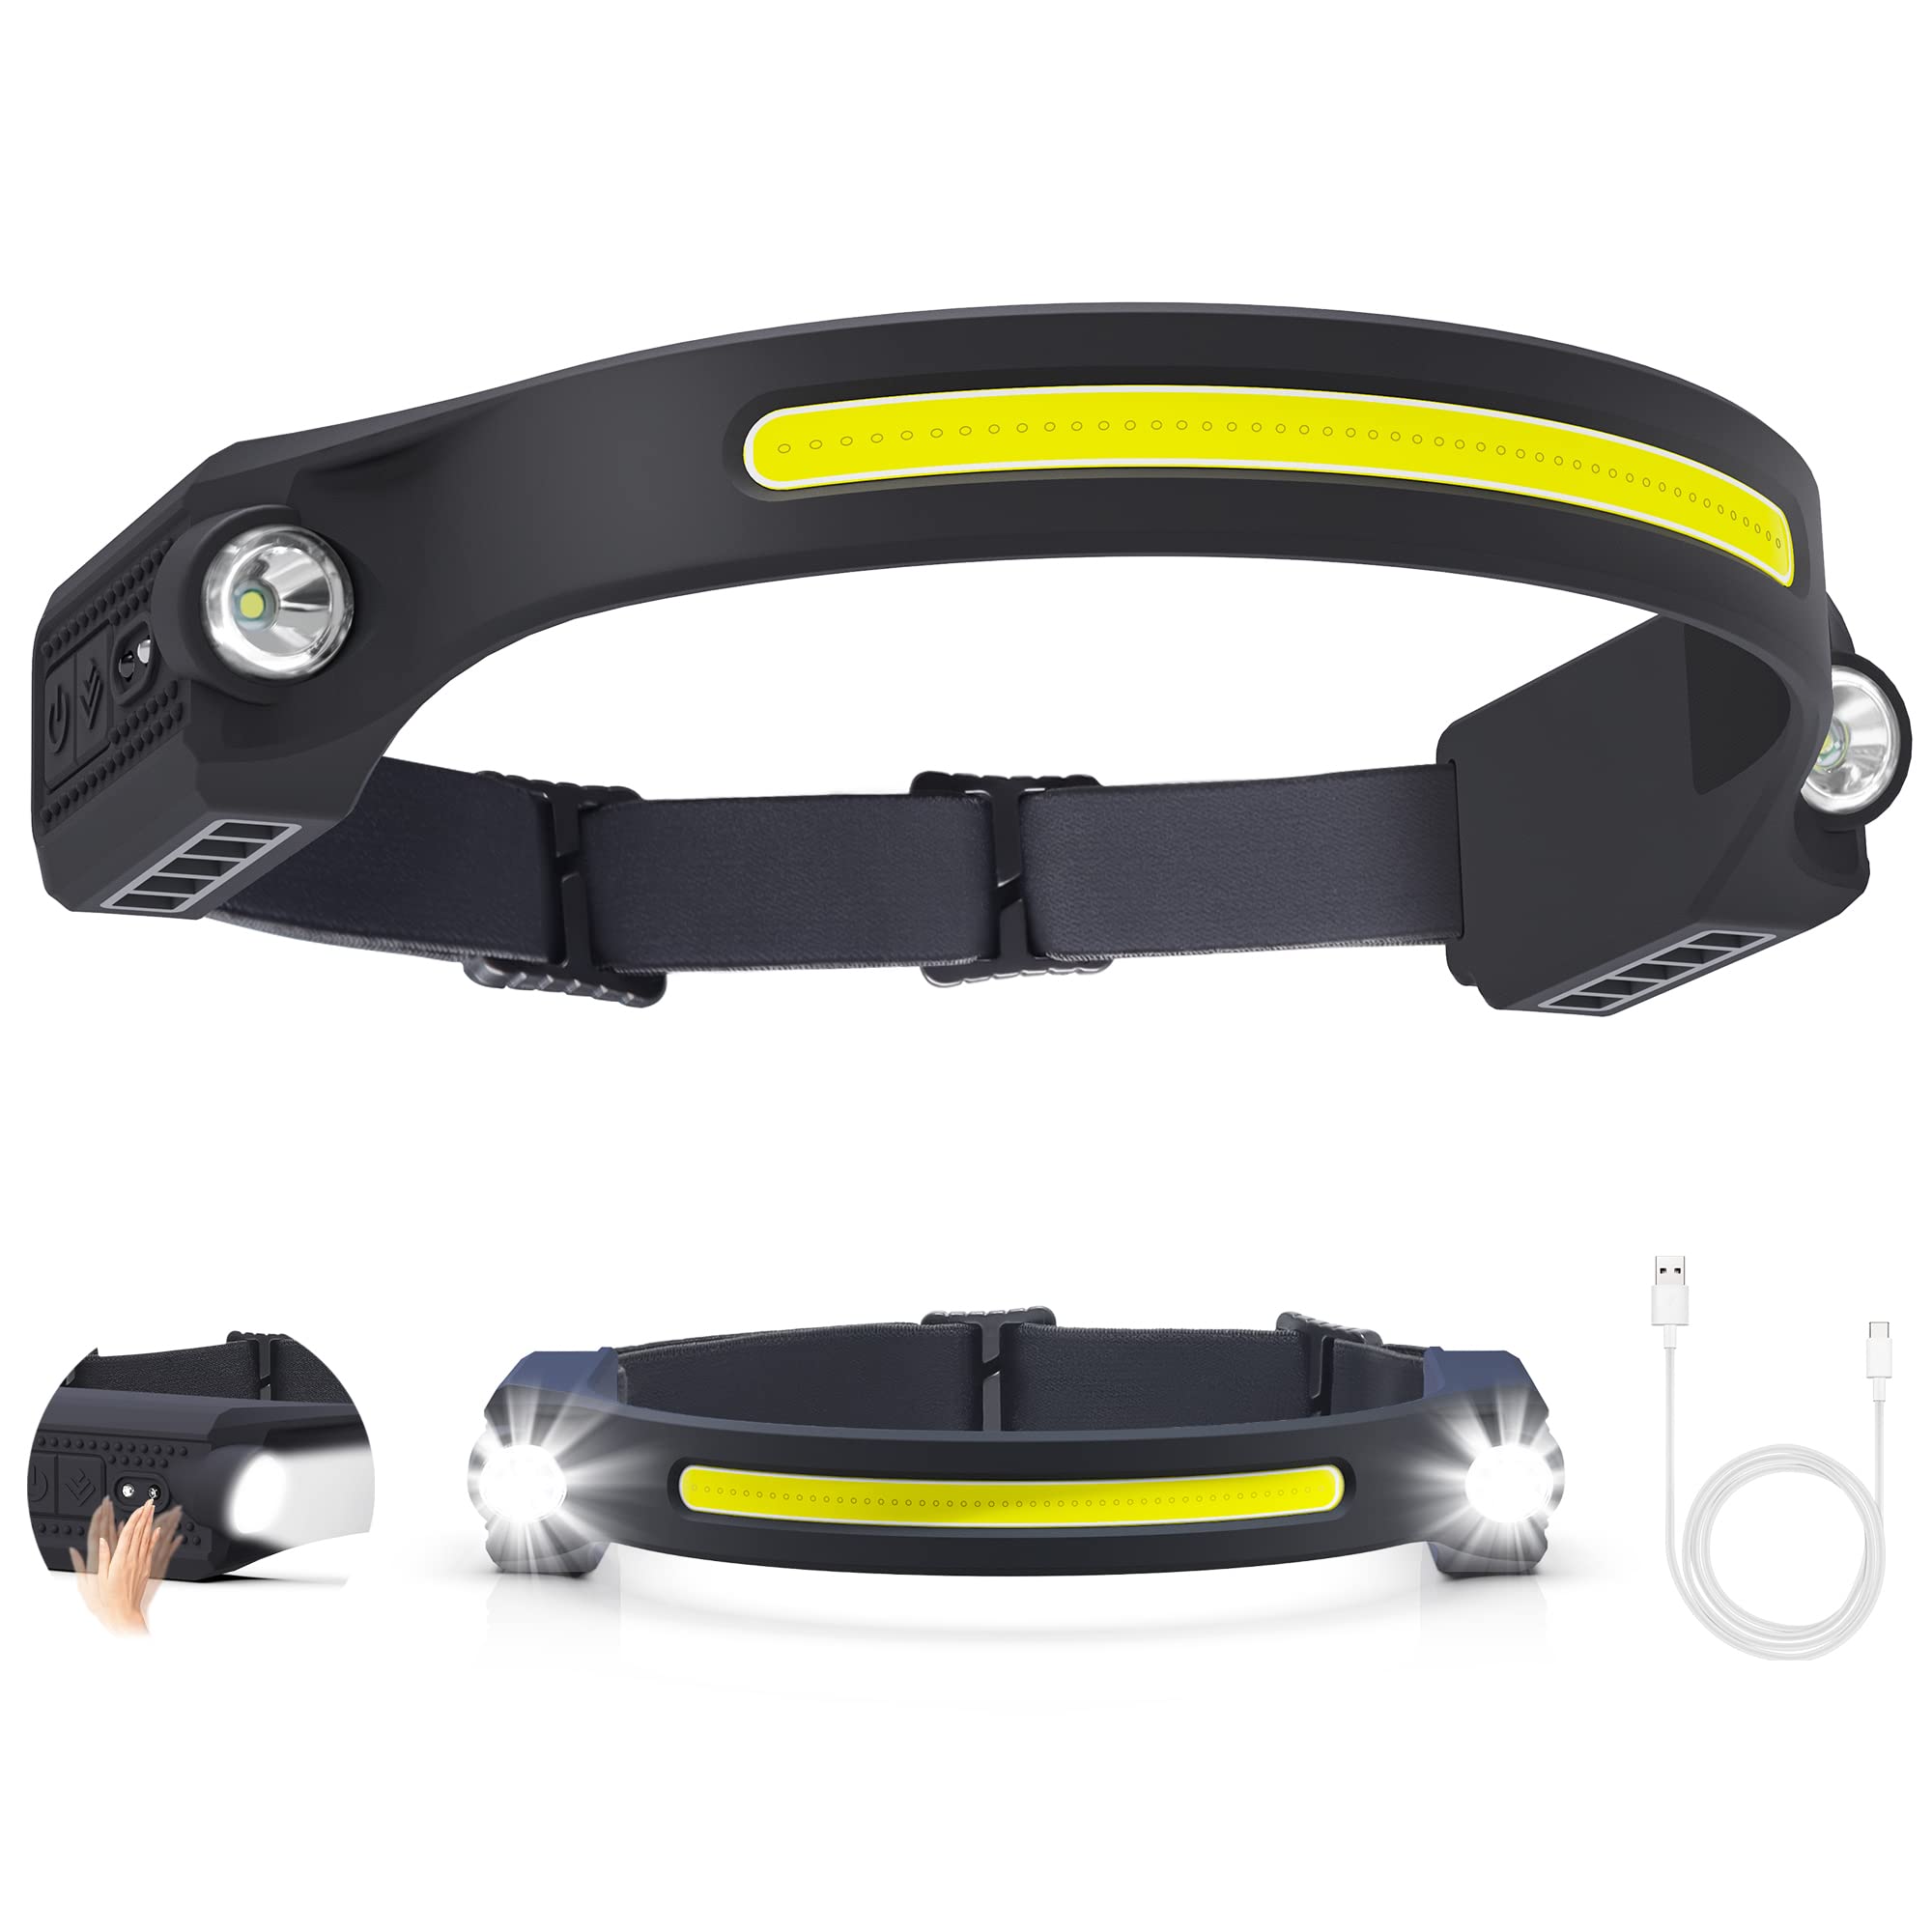 AlpsWolf LED Headlamp Rechargeable, 2 XPE LED and COB LED Head